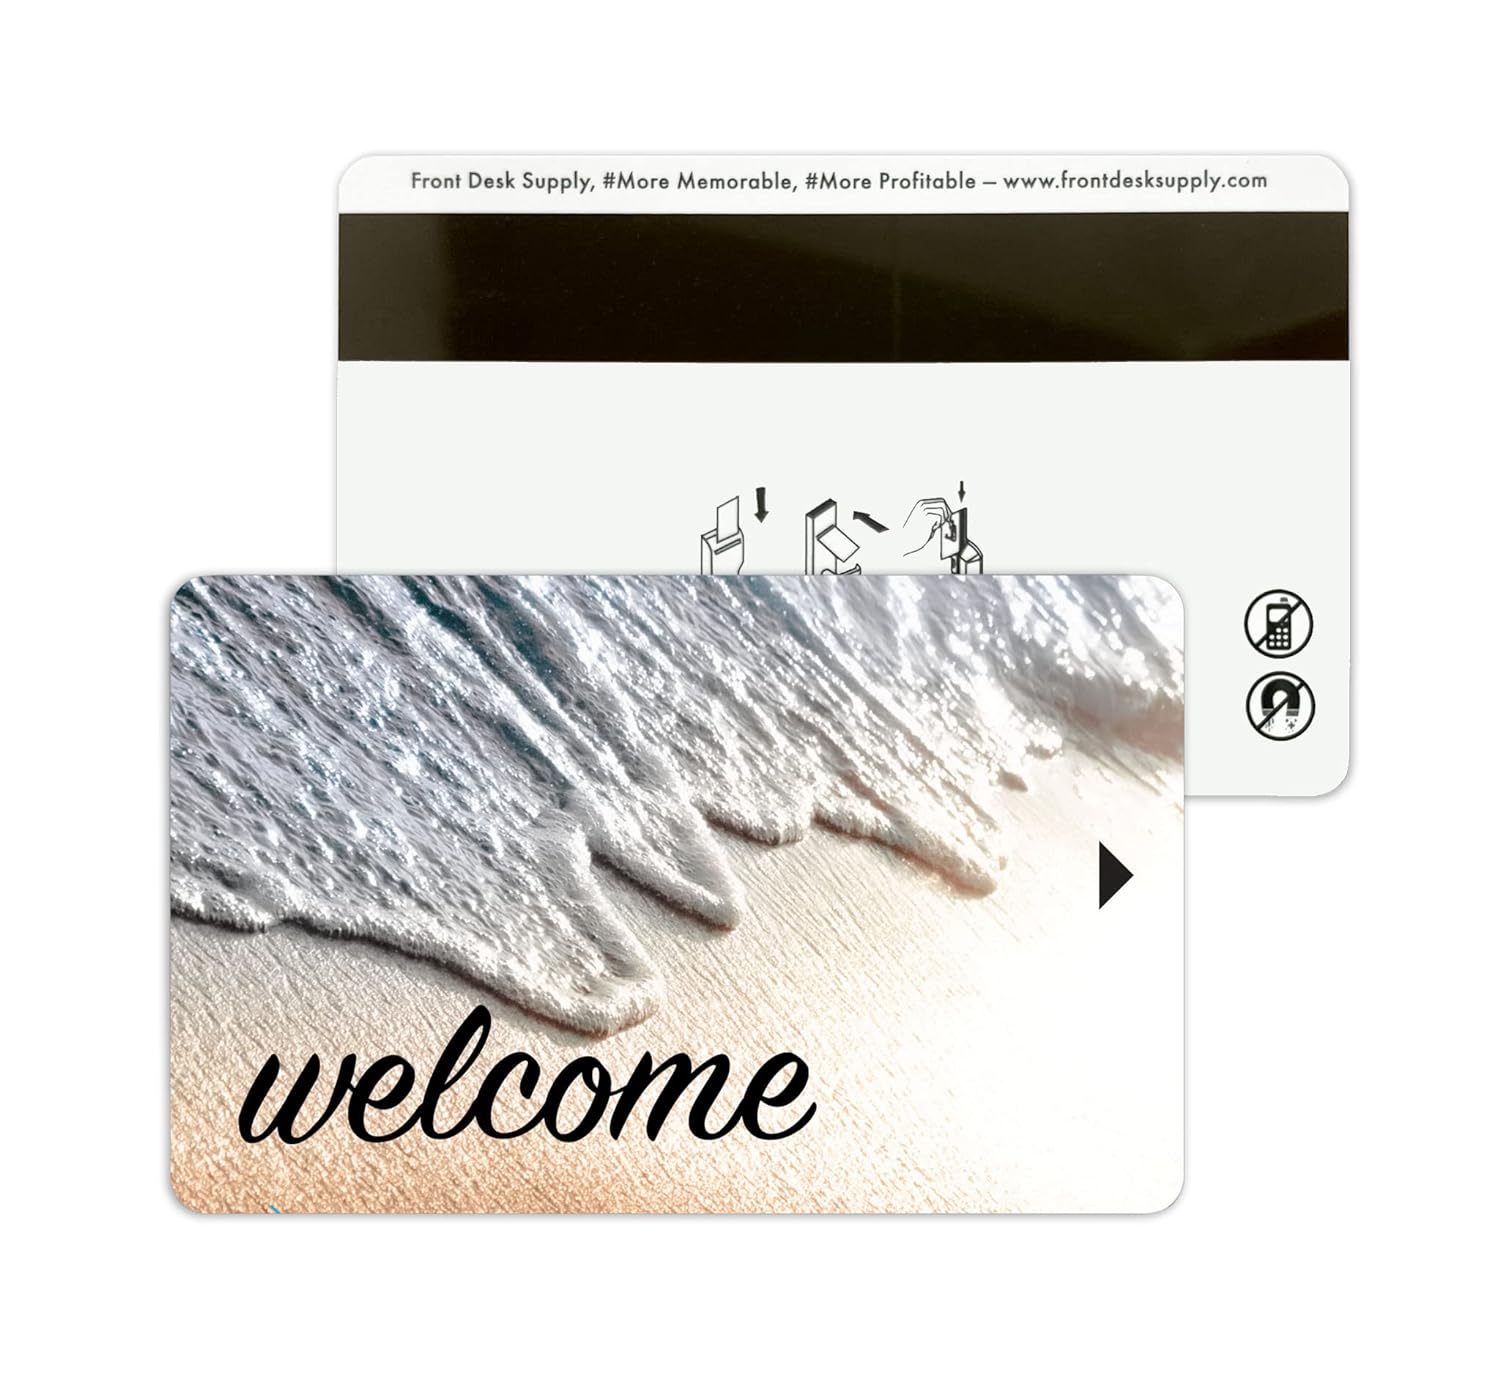 Magnetic Stripe Key Cards for Hotel and Motel Welcome Room Key Relaxing Beach Design (Set of 500)